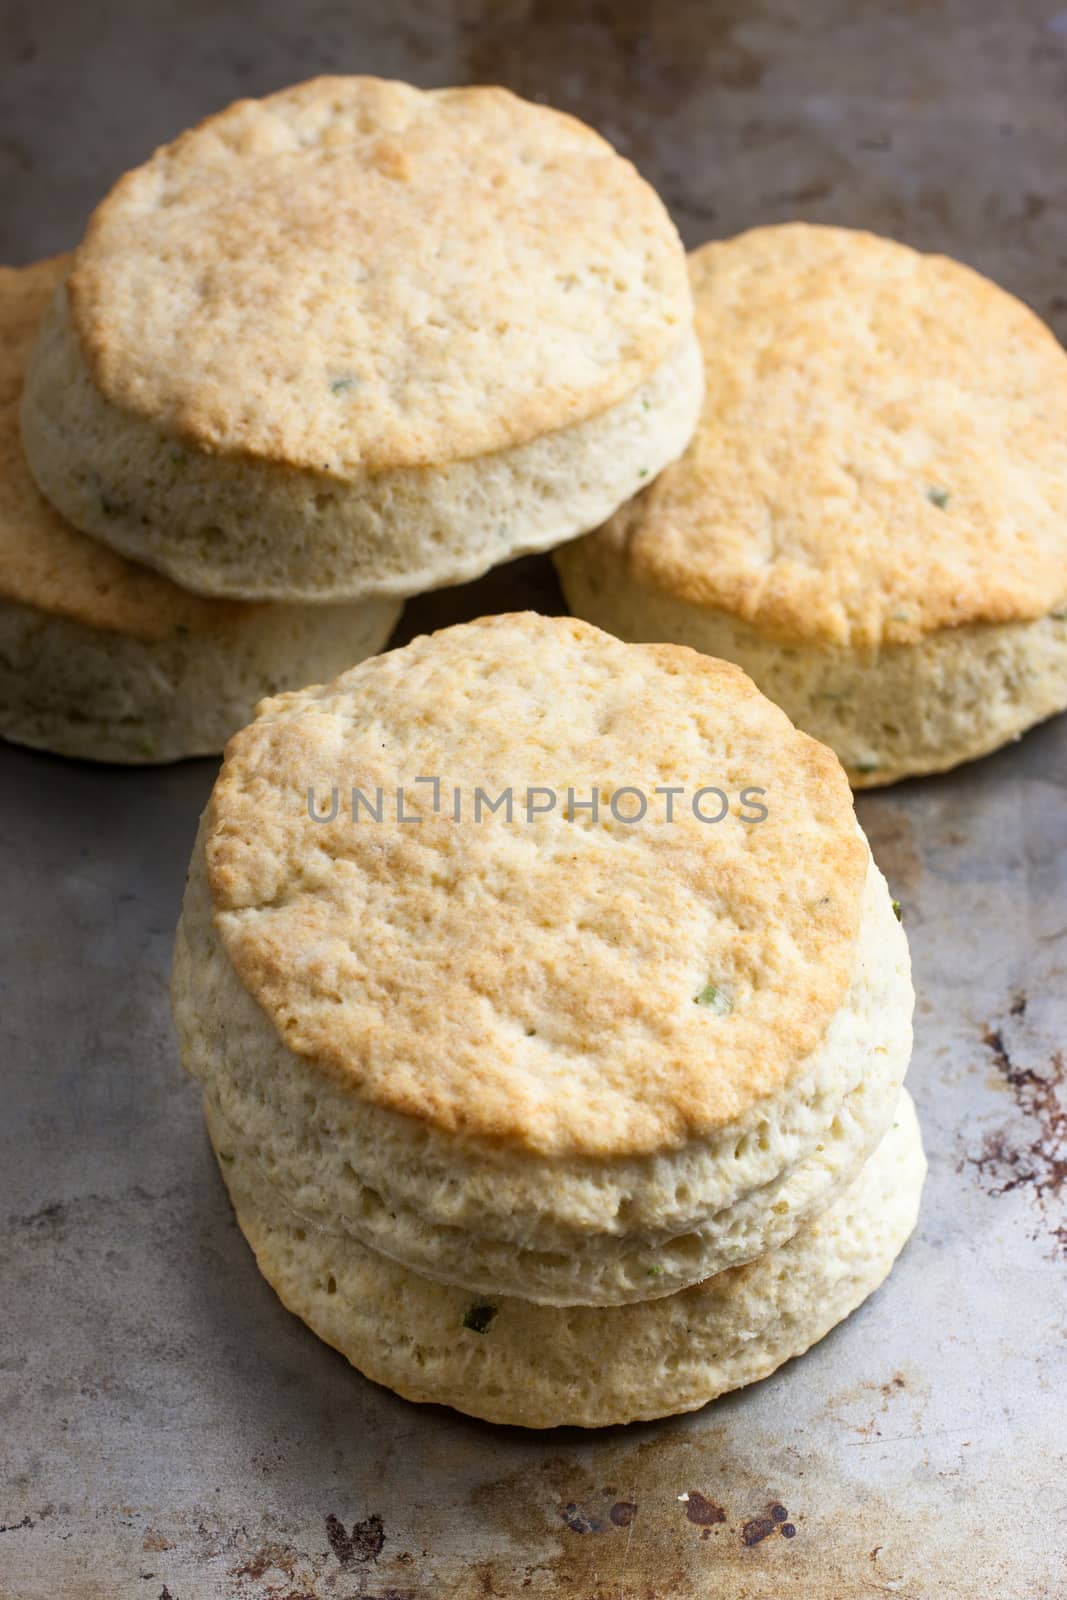 Homemade Biscuits by SouthernLightStudios